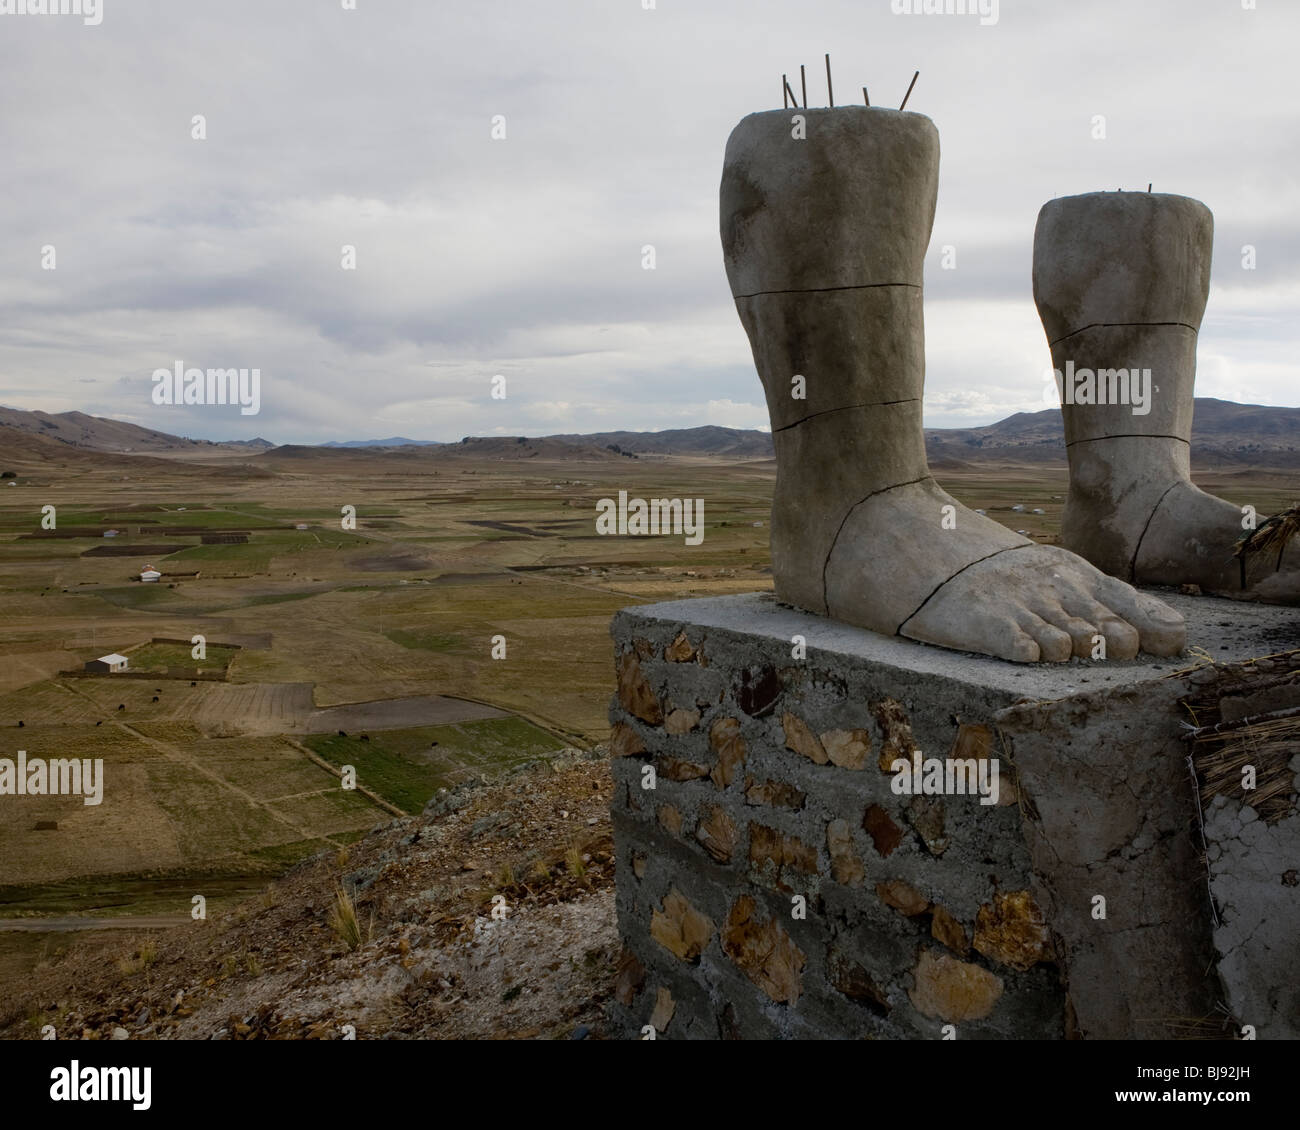 The feet of unfinished monument to indigenous hero Bartolina Sisa towering over the Bolivian altiplano in the Andes Stock Photo